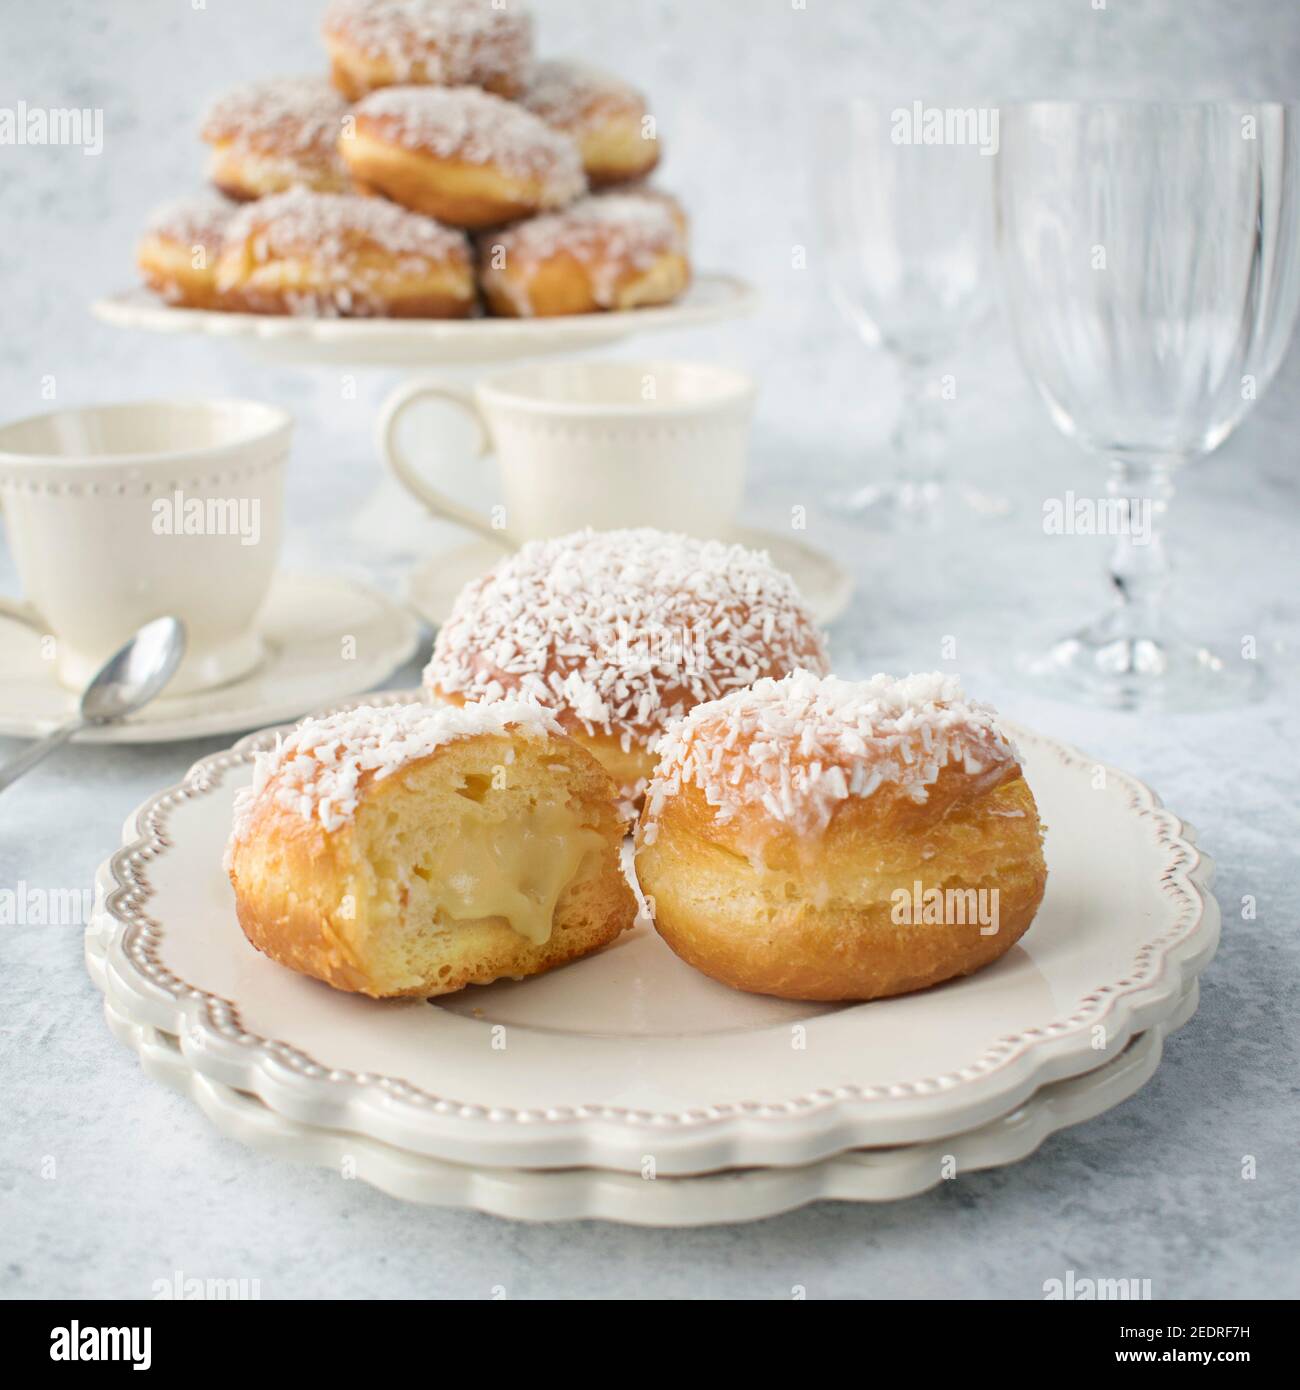 Donuts with frosting and coconut and white chocolate pudding filling. Appetizing sweet cakes on a white plate. Stock Photo